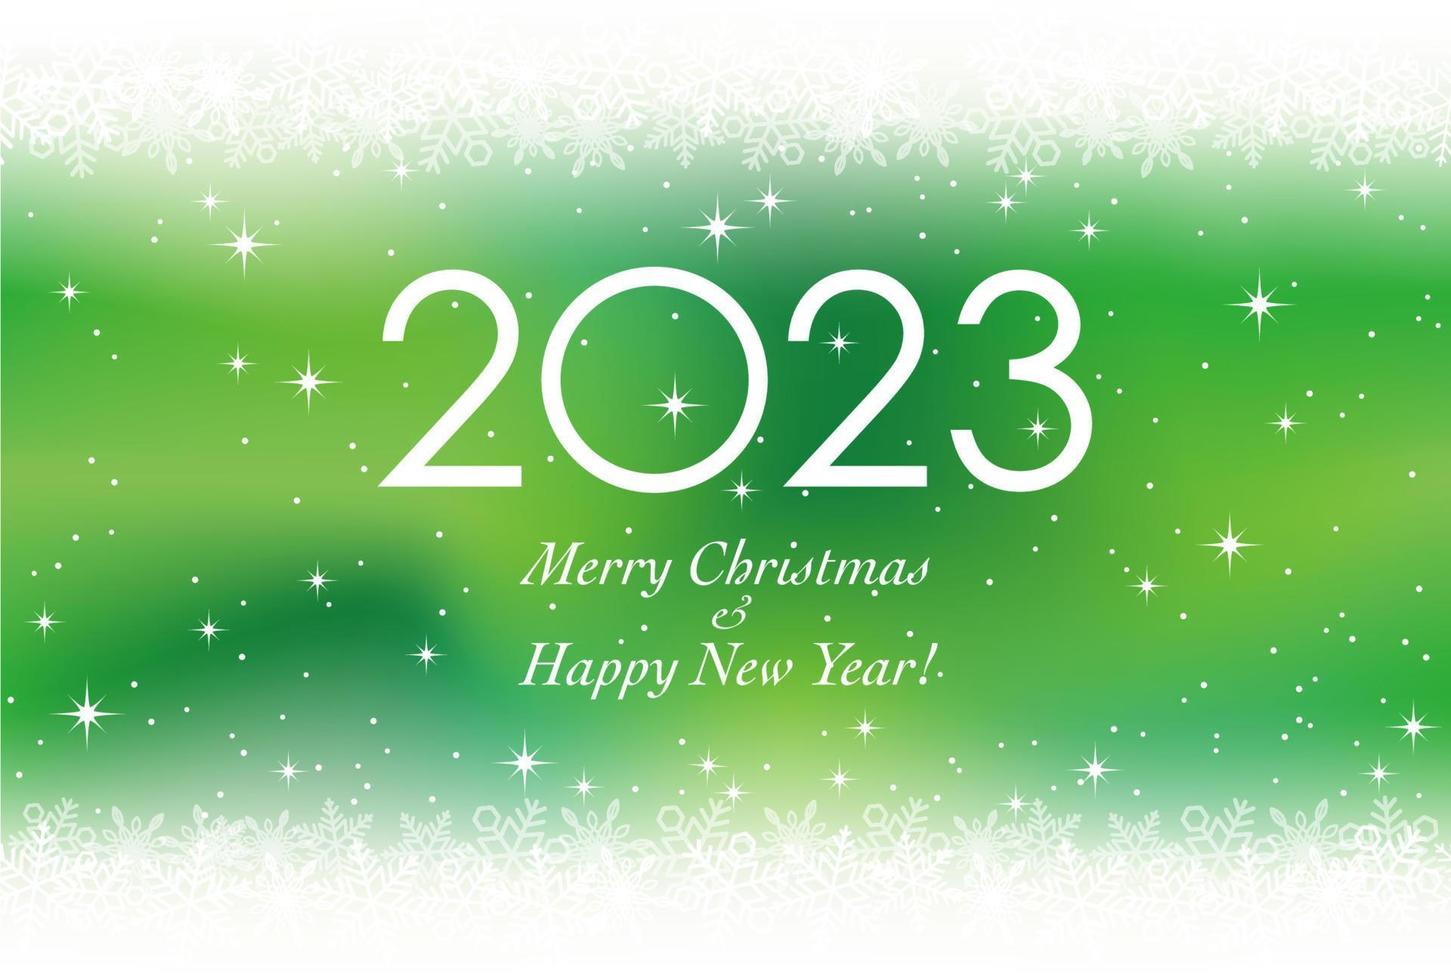 The Year 2023 Christmas And New Years Greeting Card With Snowflakes On A Green Background Illustration Free Vector